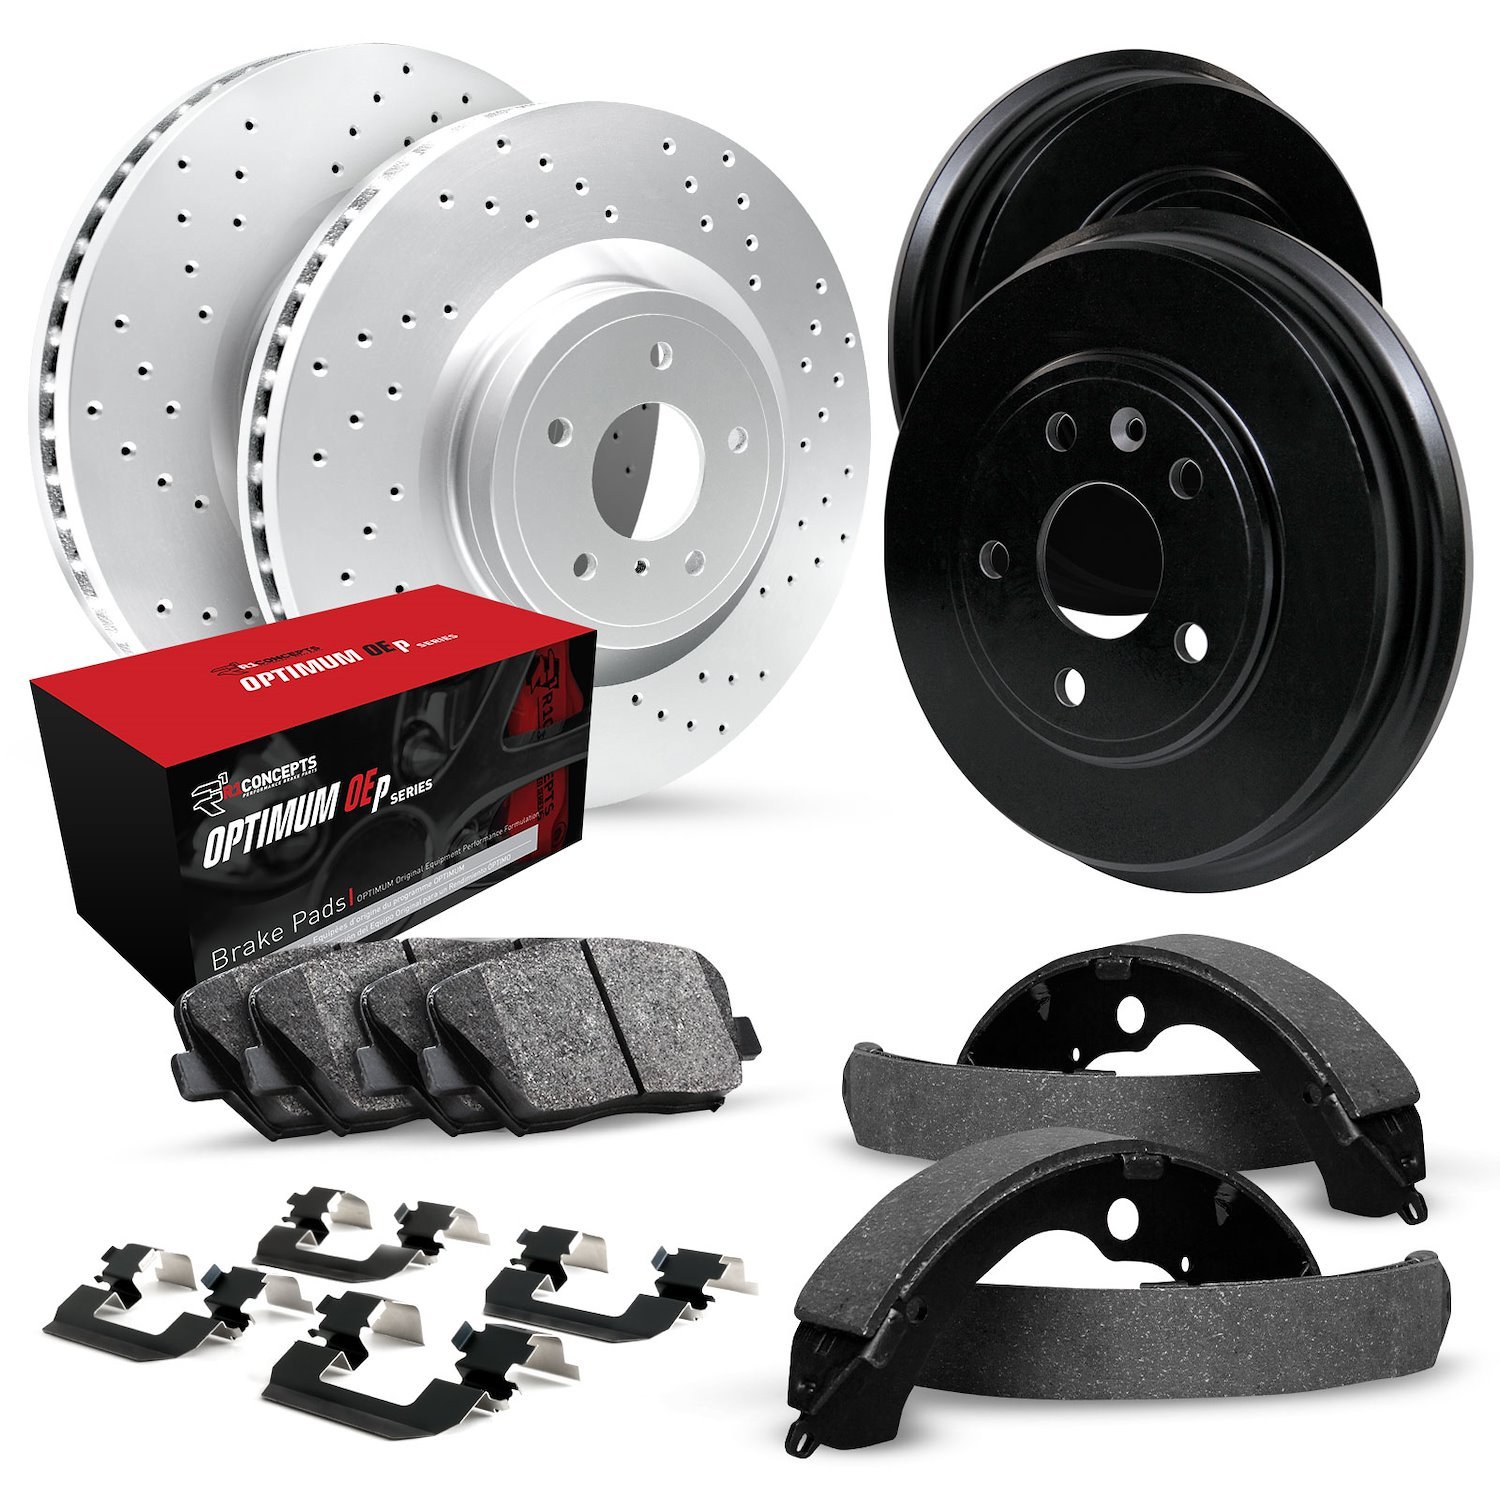 GEO-Carbon Drilled Brake Rotor & Drum Set w/Optimum OE Pads, Shoes, & Hardware, 1991-1996 GM, Position: Front & Rear